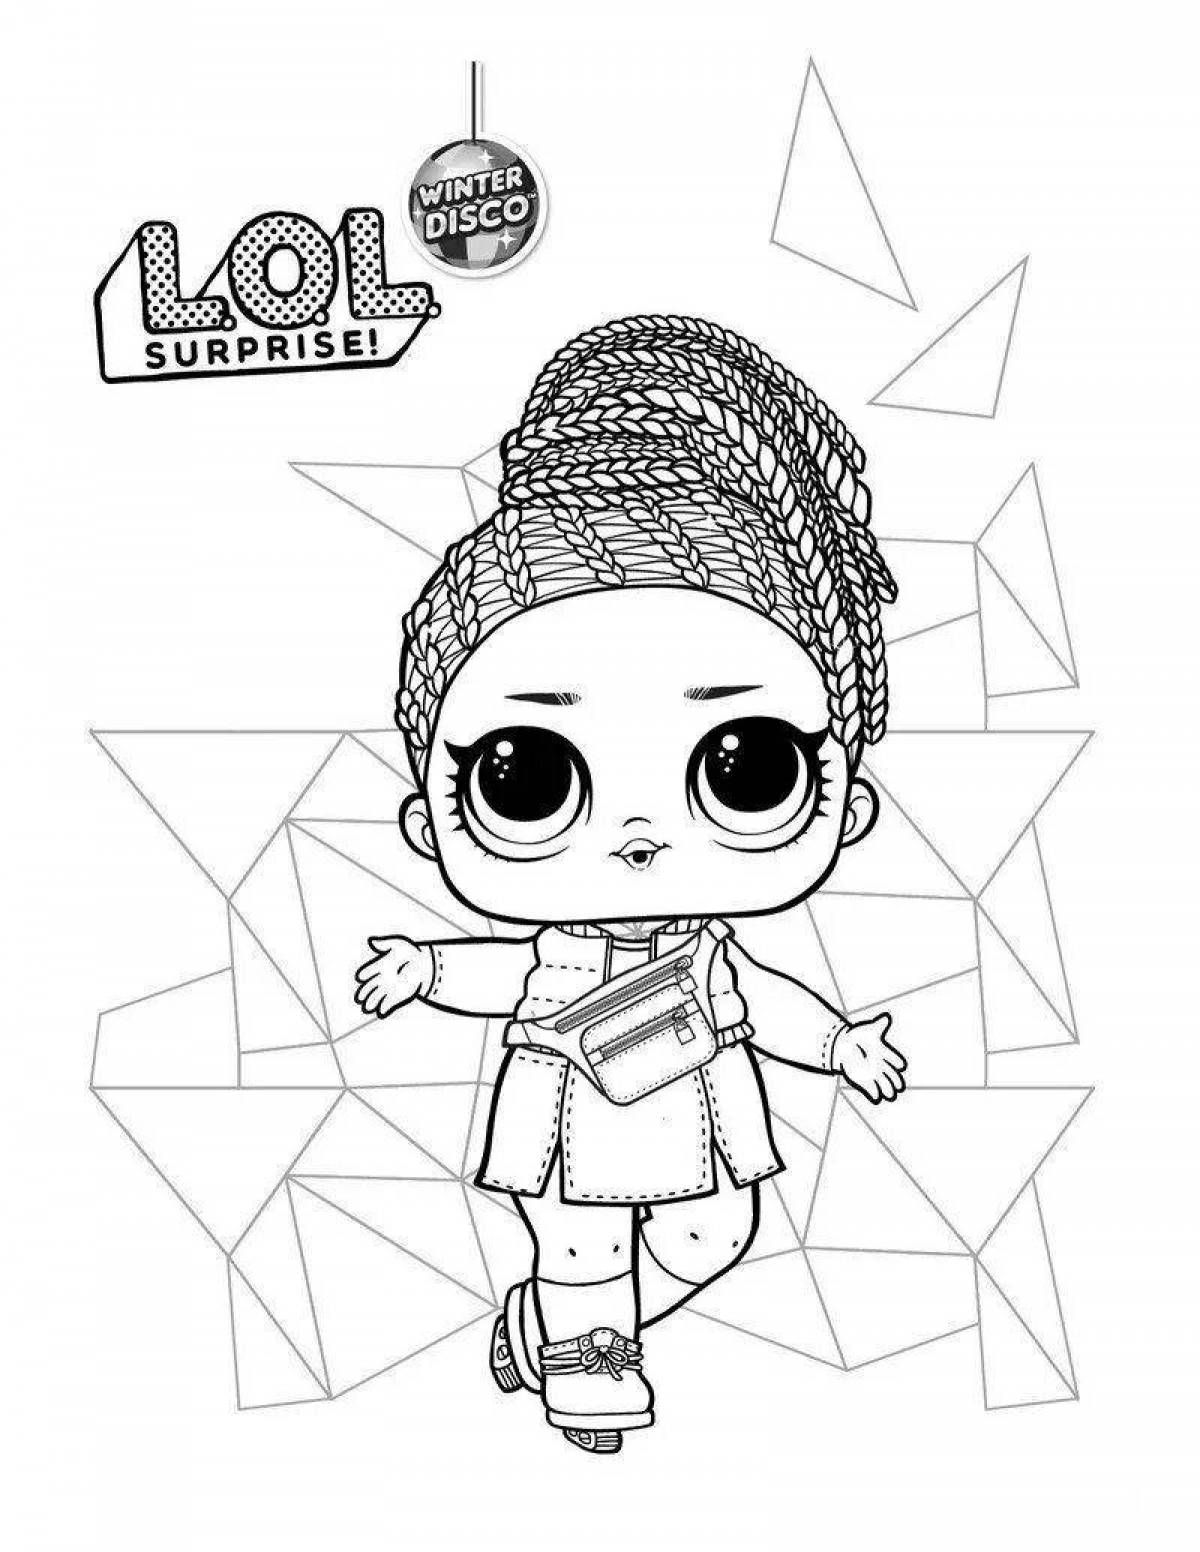 Cool coloring doll lol, new series